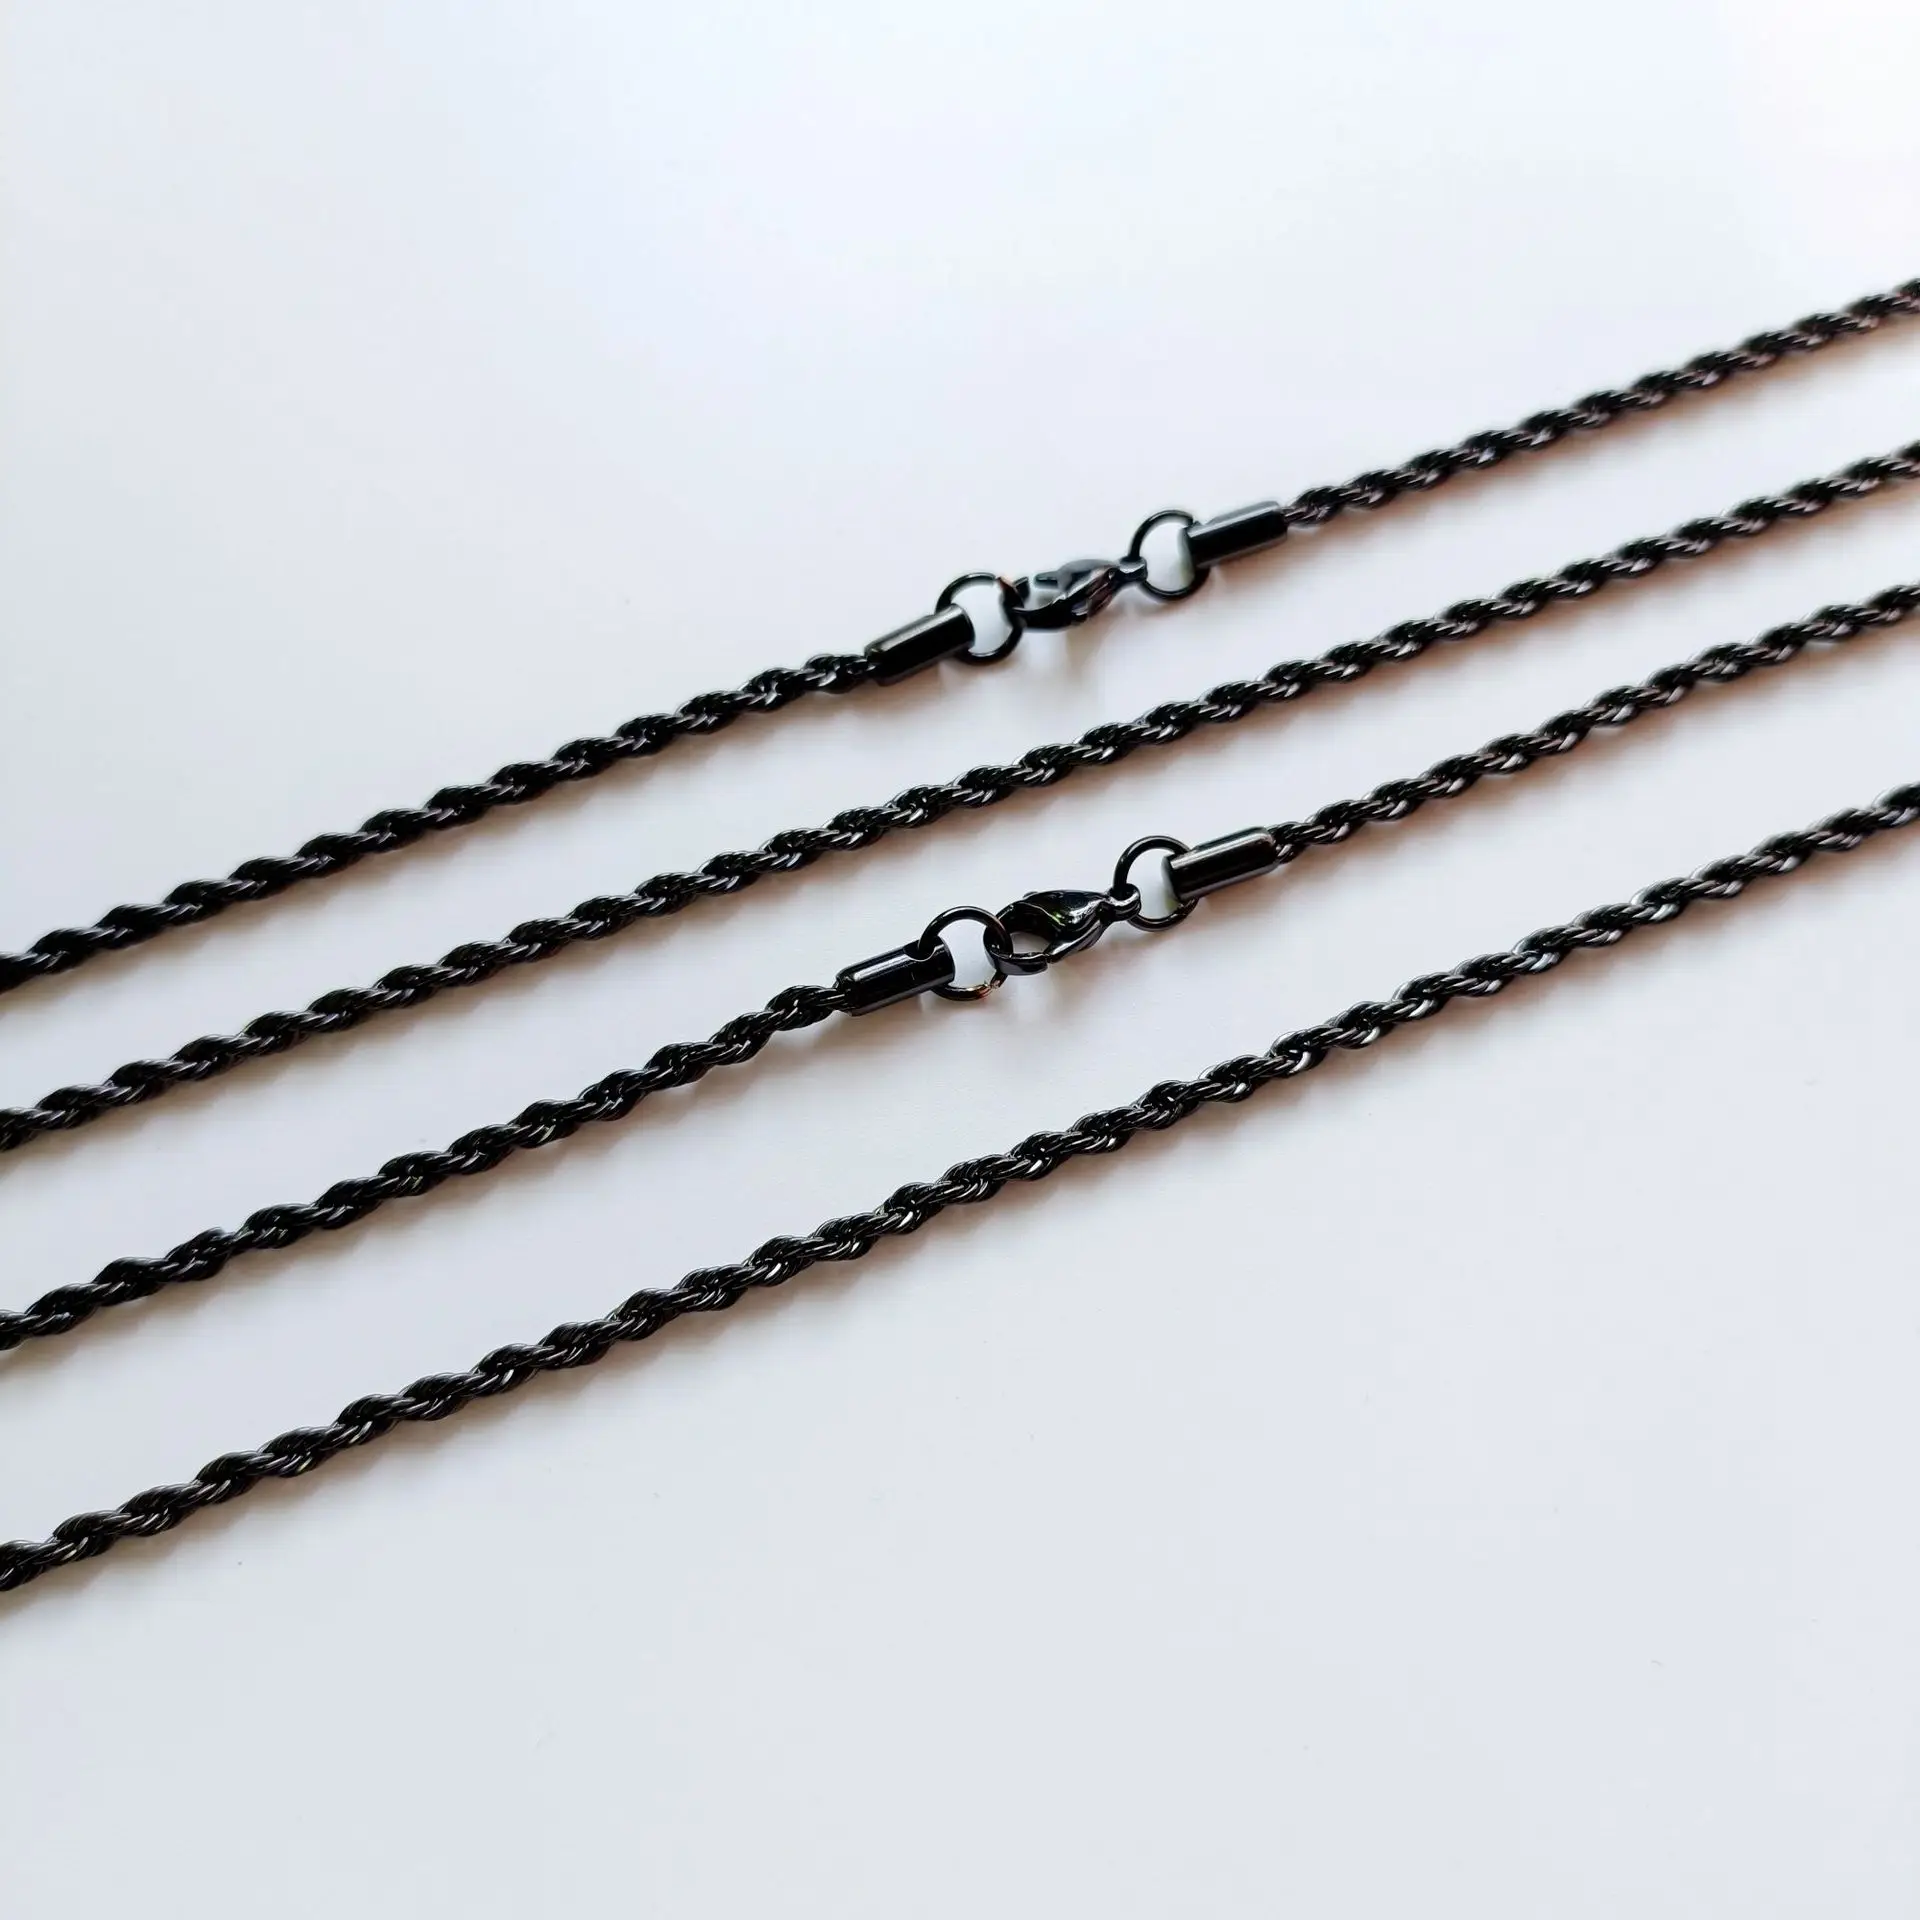 

Black stainless steel Fried Dough Twists necklace fashion men's accessories chain titanium twisted rope chain wholesale